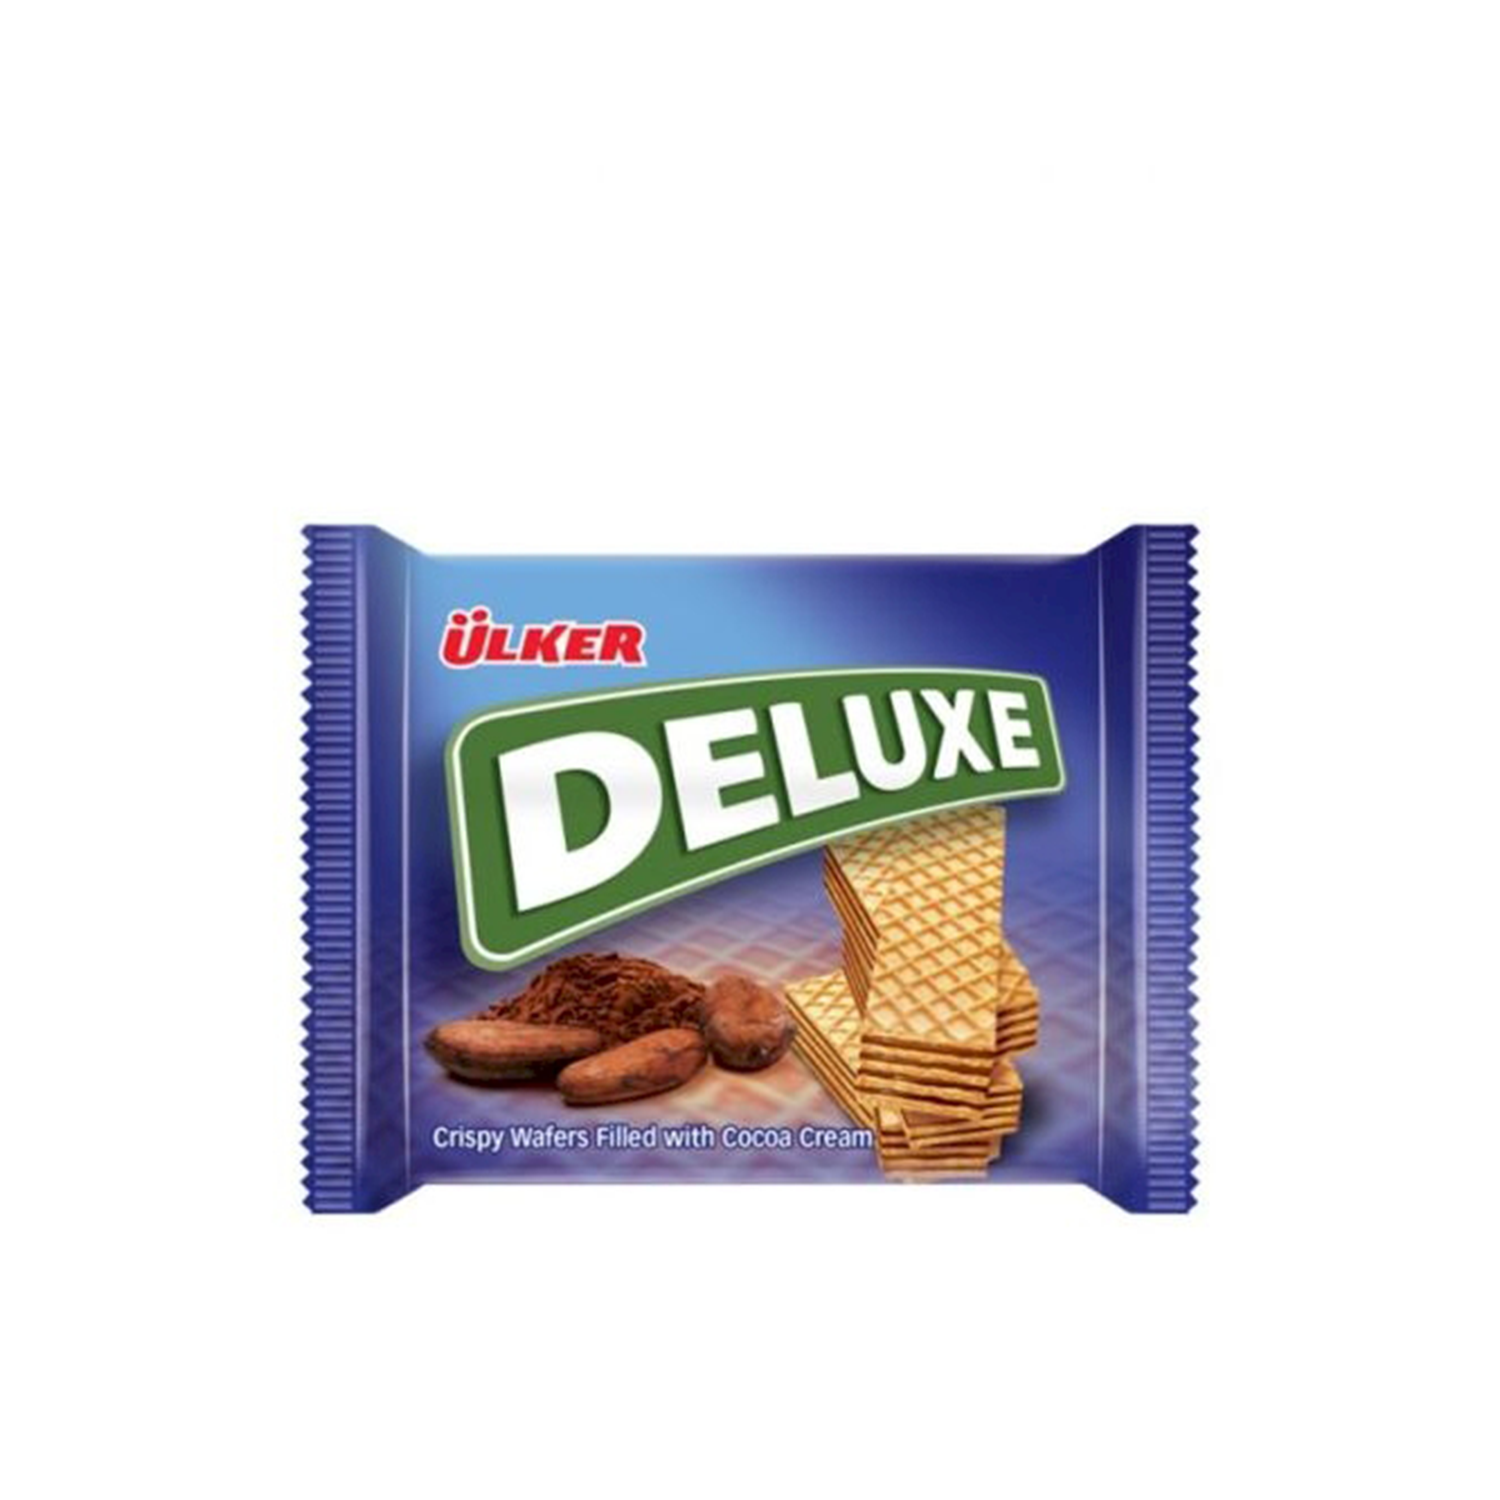 Ulker Crispy Wafers With Cocoa Cream Deluxe 39g